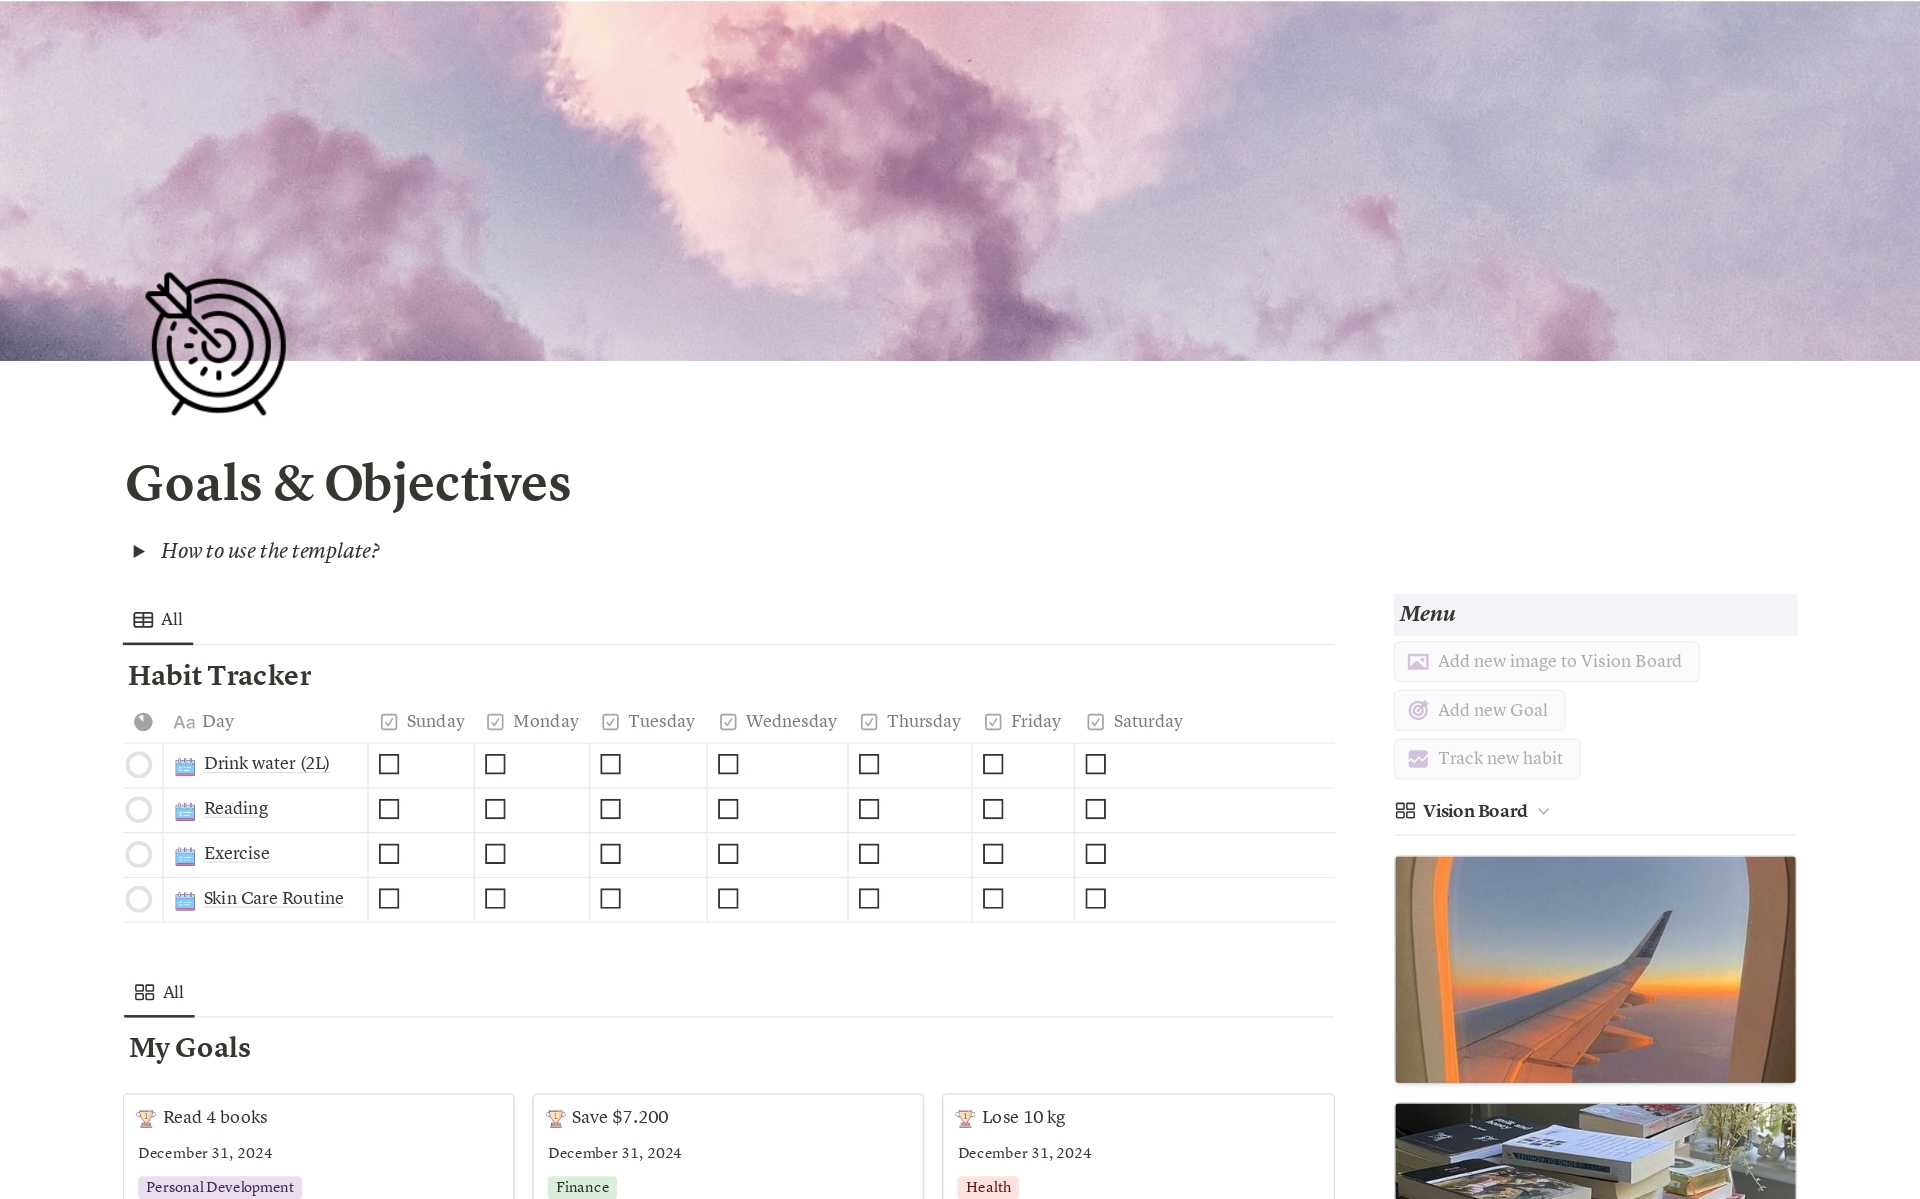 Elevate productivity with our 'Goals and Objectives' template! Streamline goal-setting, tracking, and attainment for clarity, focus, and progress. Define goals, track milestones, and cultivate daily habits. Start your journey to success today!